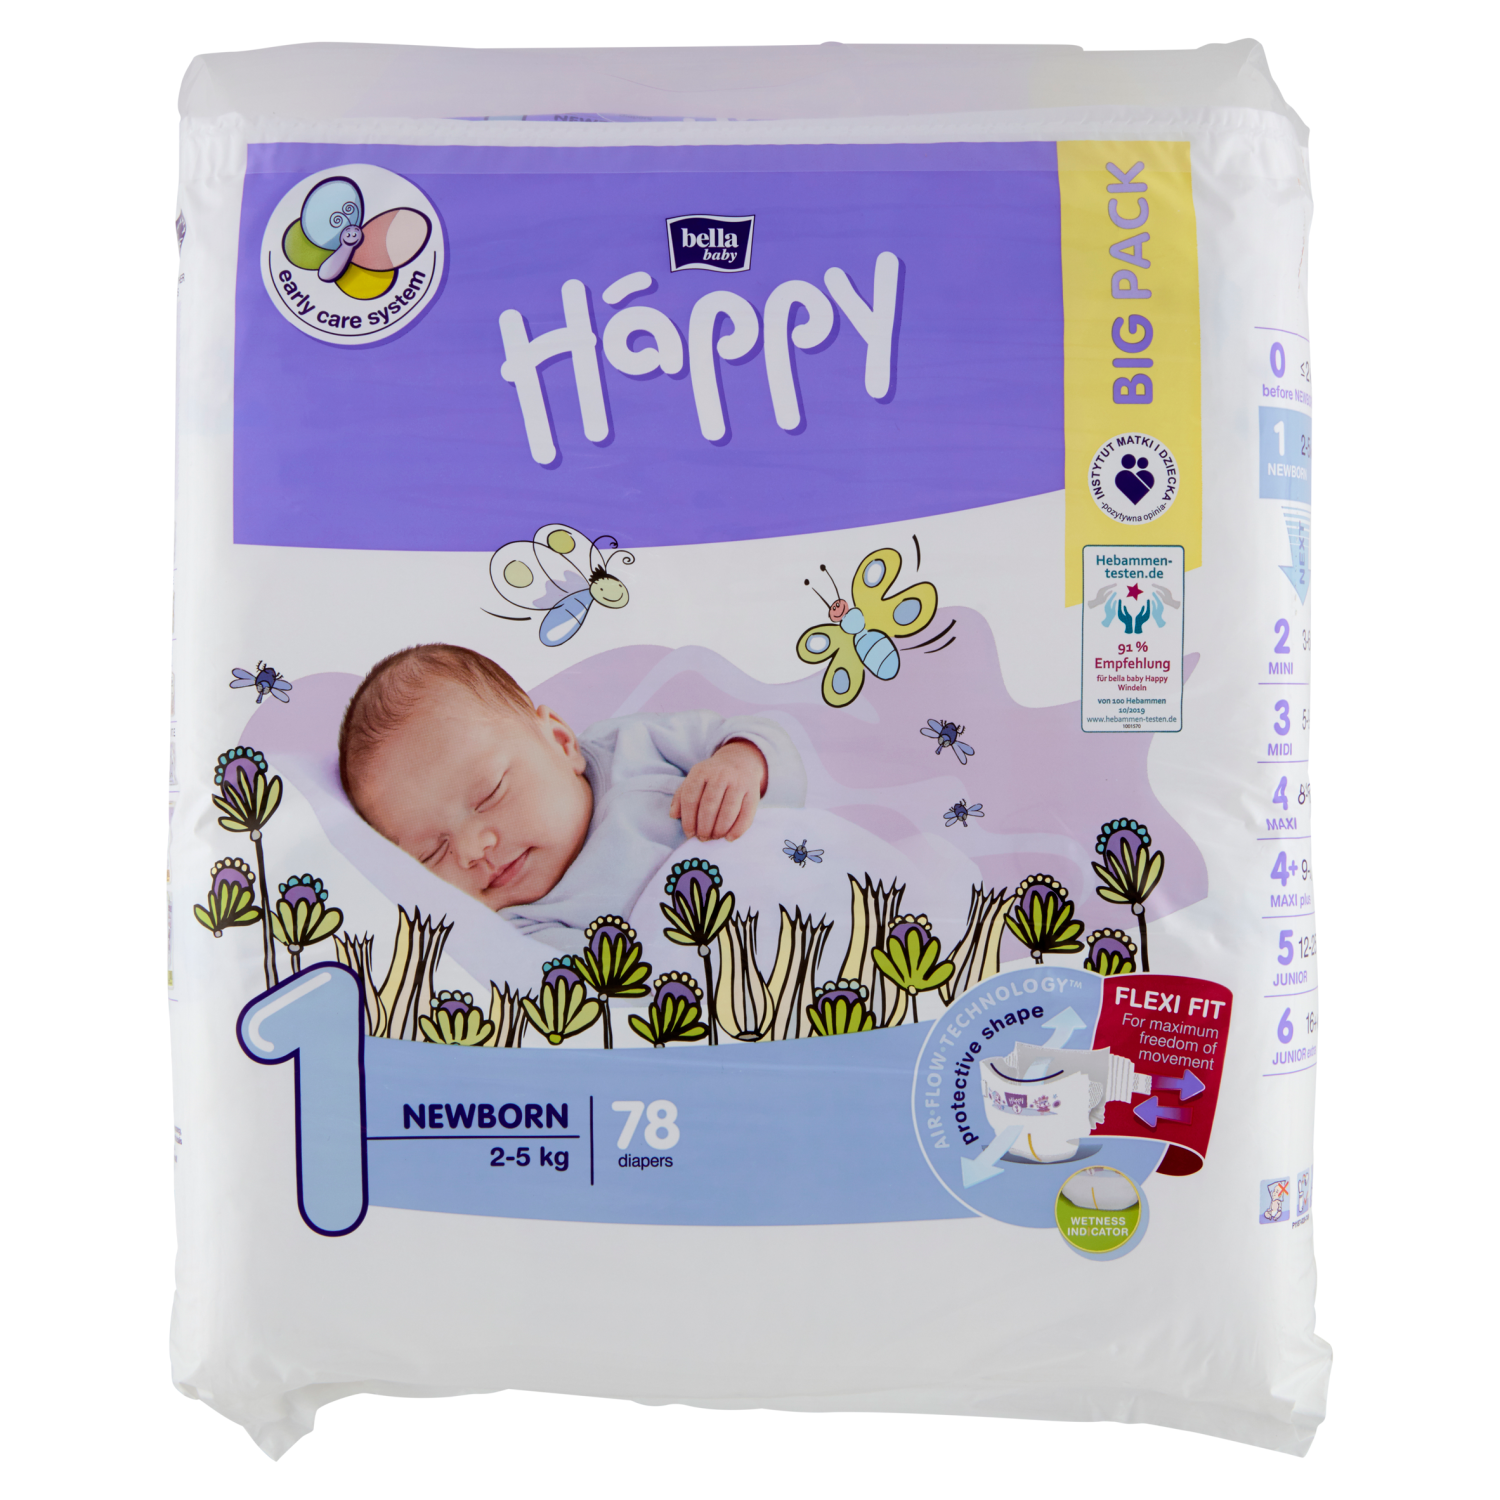 pampers premium care a baby dry